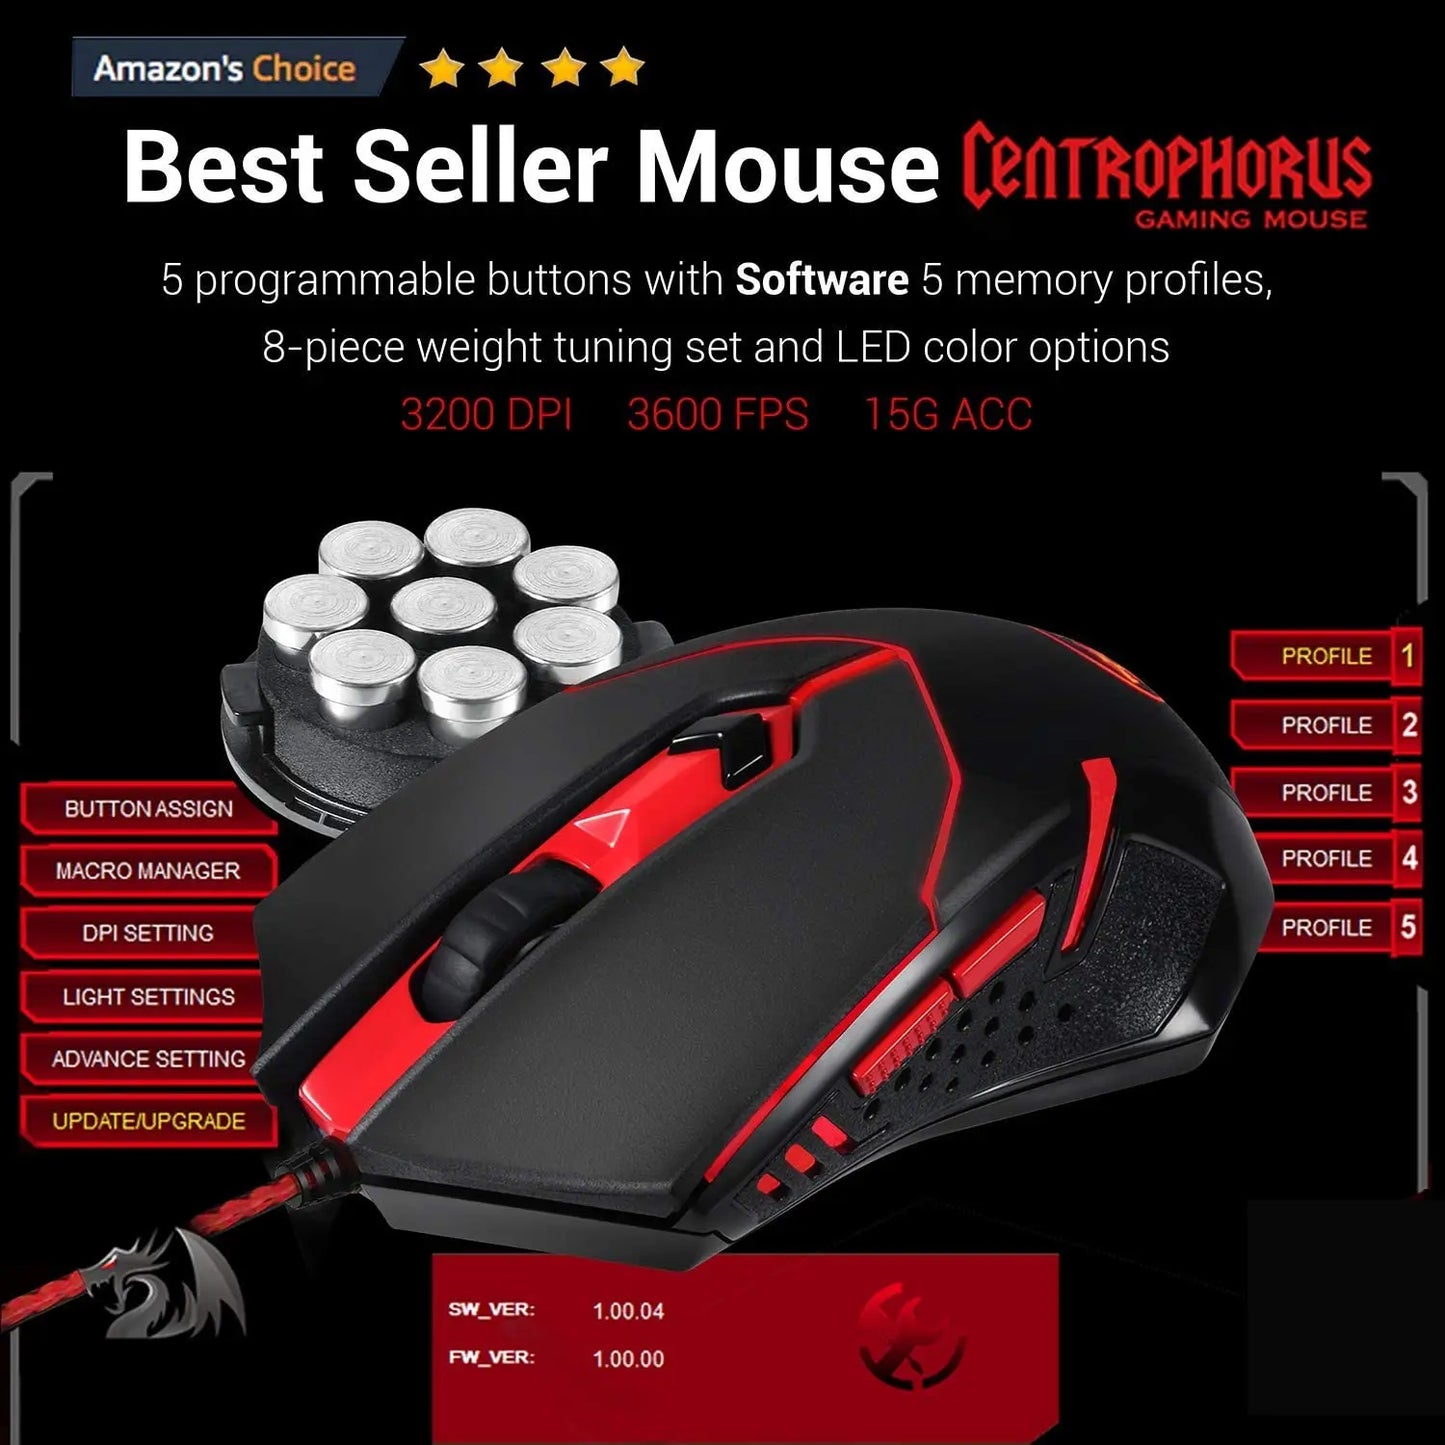 Redragon S101 Wired Gaming Keyboard Mouse Combo RGB Backlit 3200 DPI Keyboard Mouse Set for Windows PC Gamers